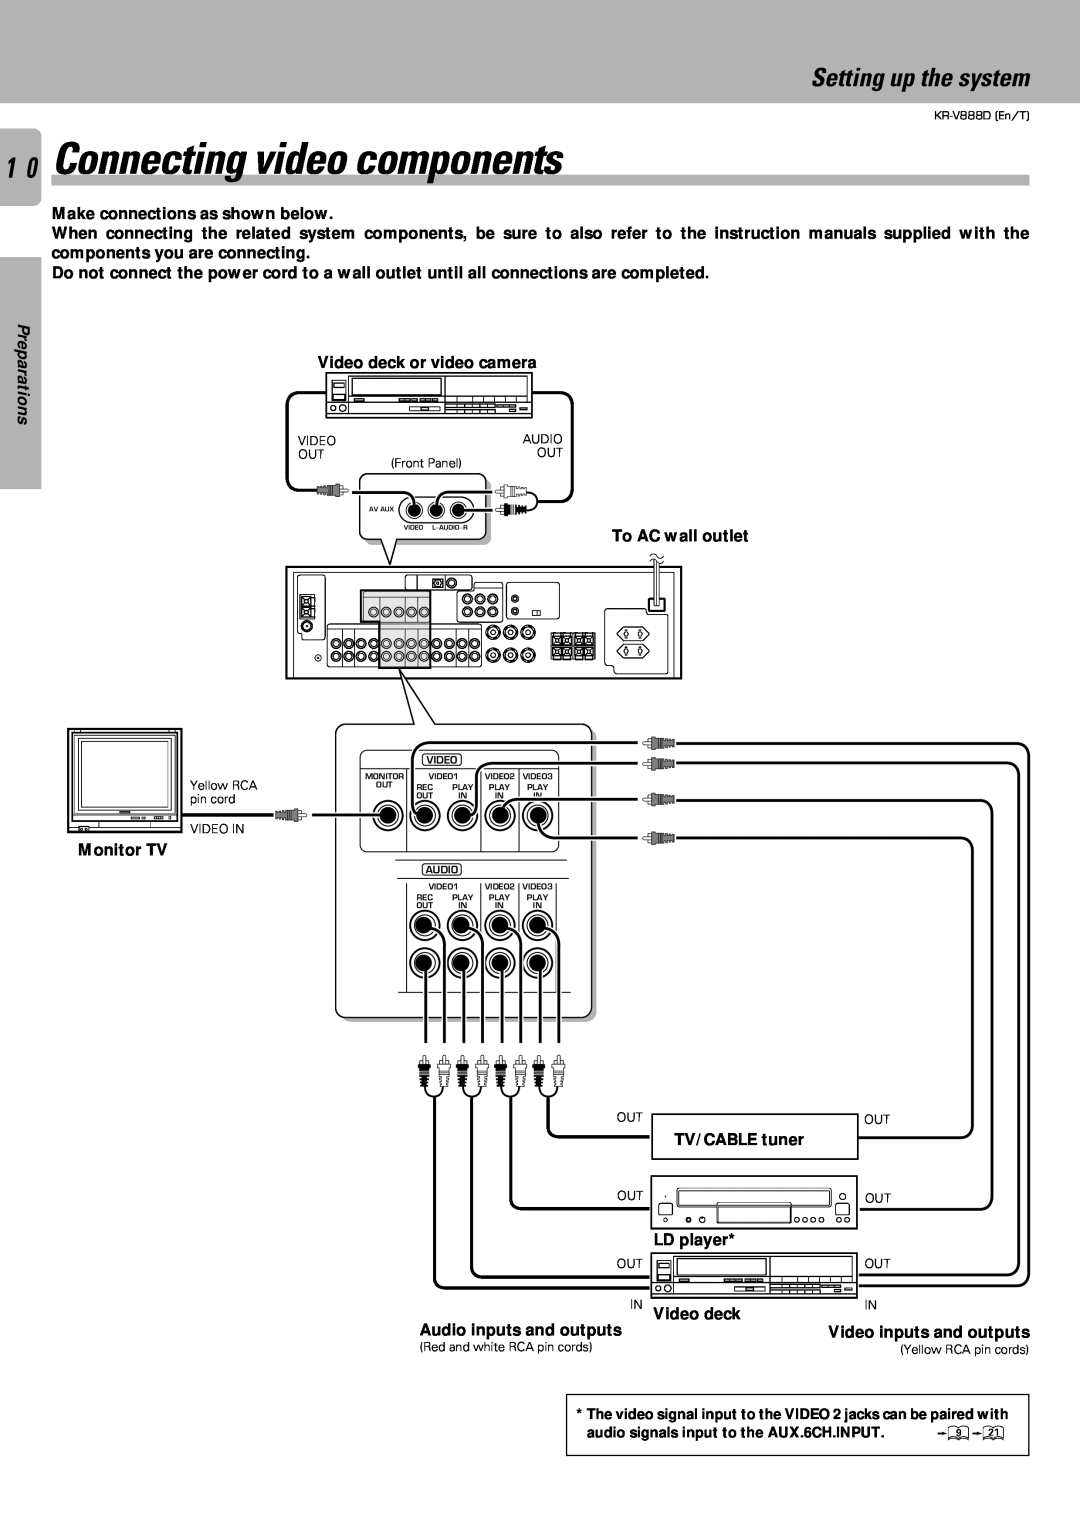 Kenwood KR-V888D instruction manual 1 0 Connecting video components, Setting up the system, Preparations 